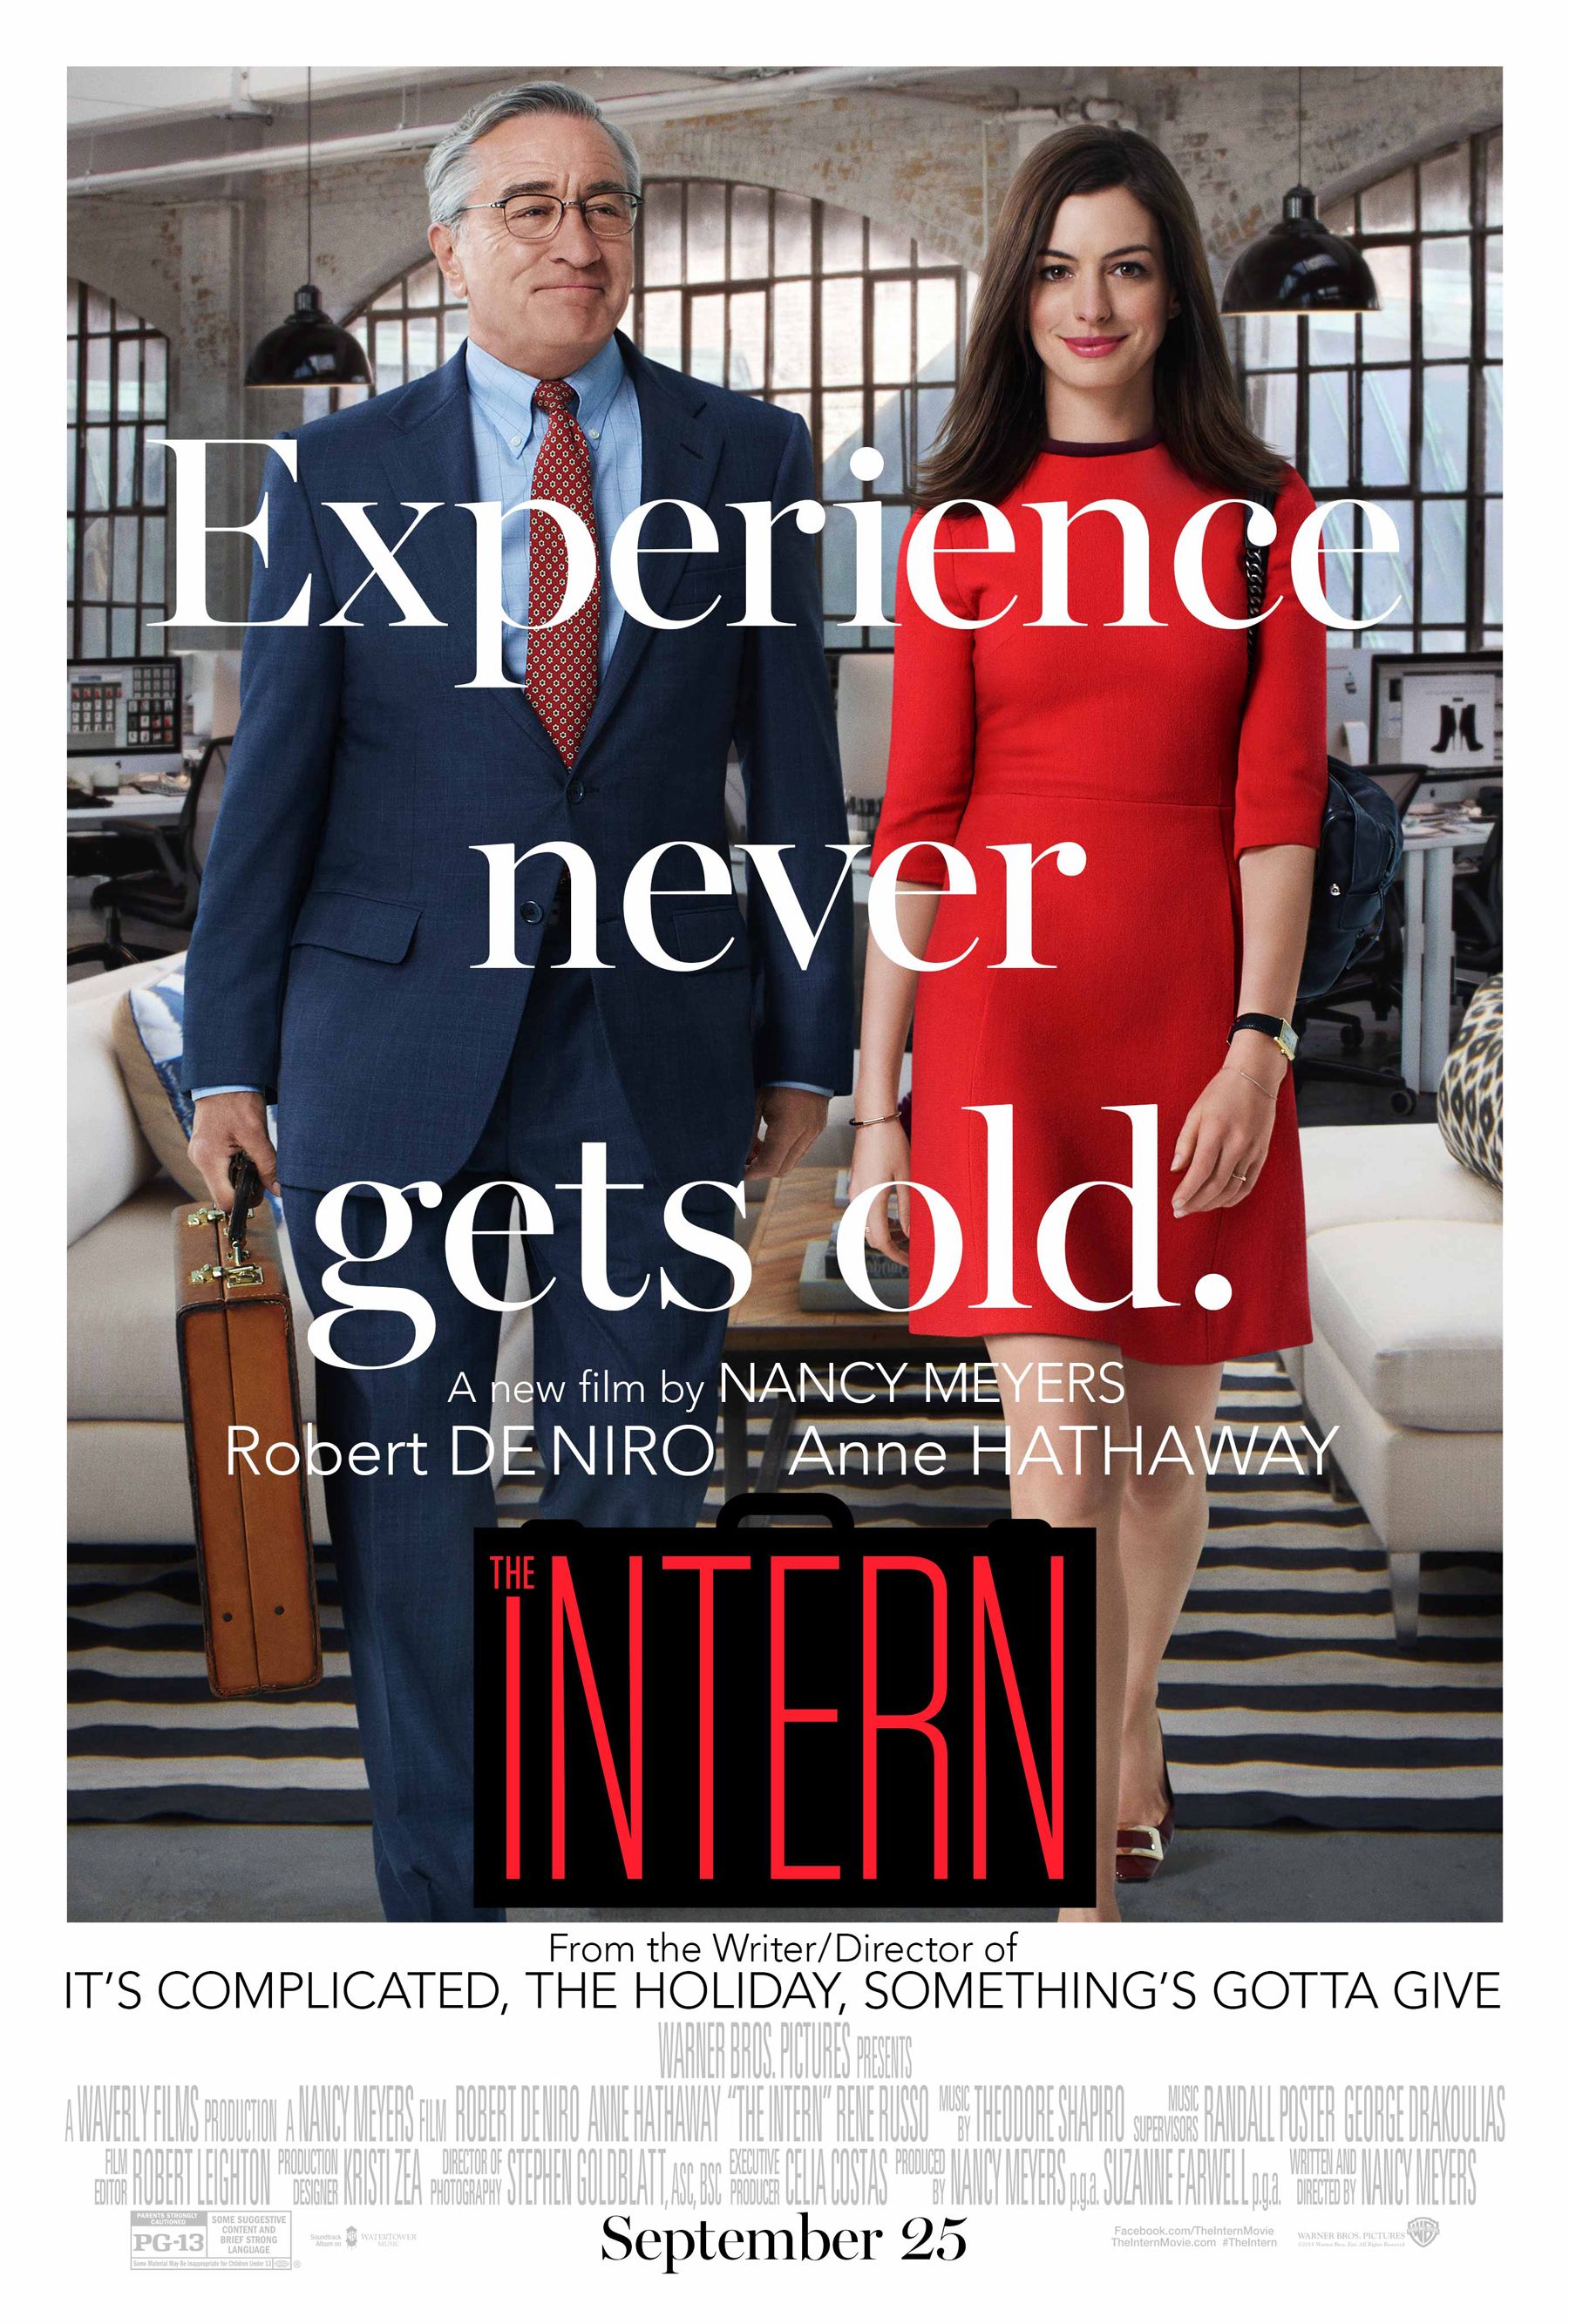 The Intern Upcoming Movies. Movie Database. JoBlo.com, Release Date Latest Picture, Posters, Videos and News